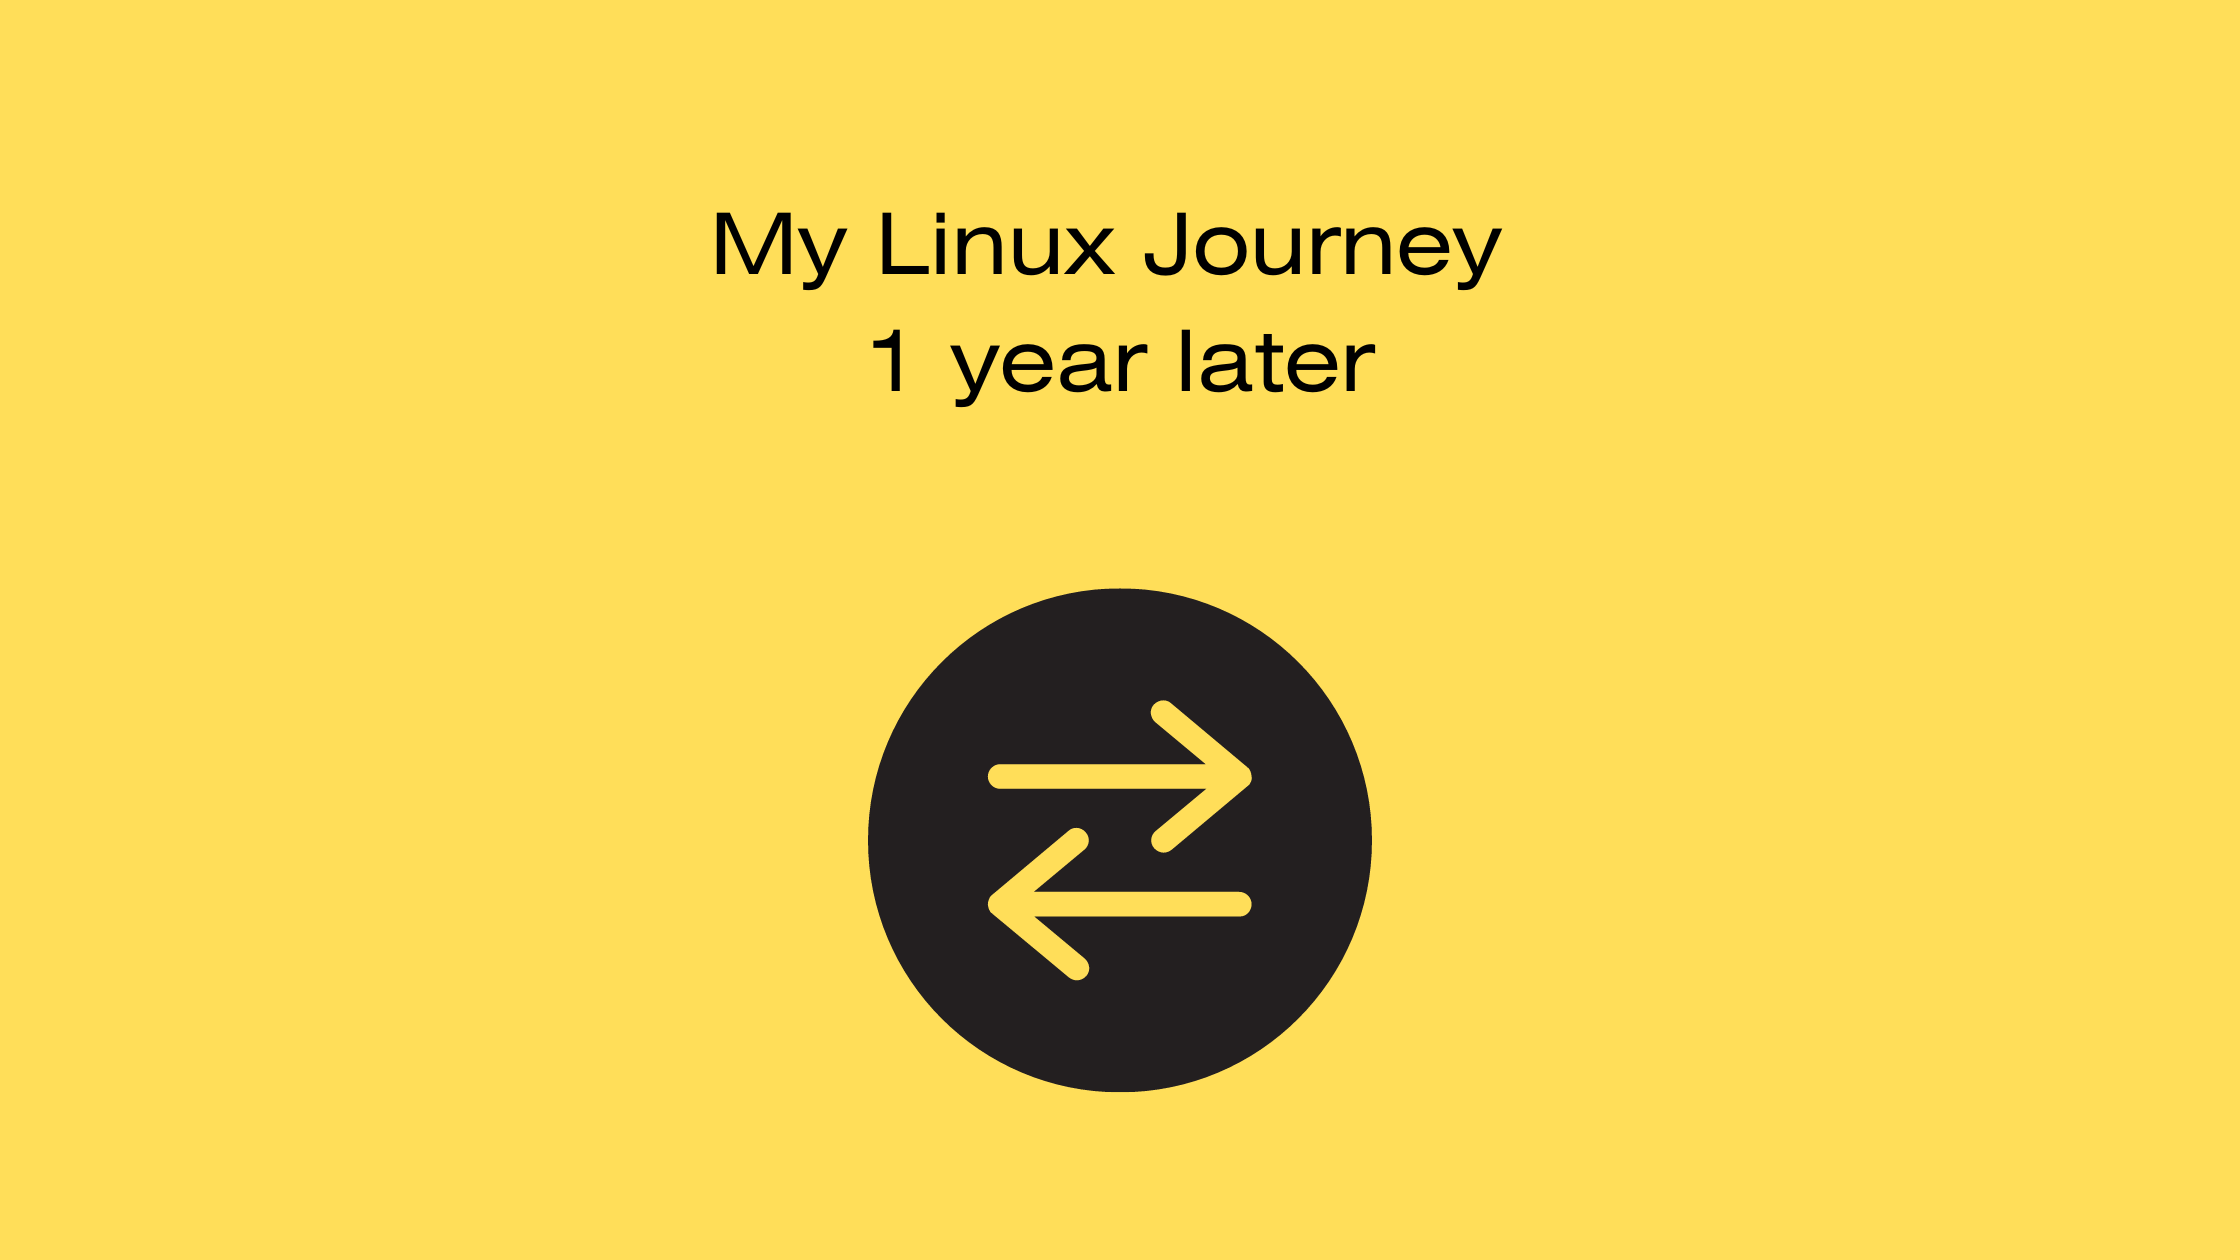 My Linux journey: 1-year later after the switch